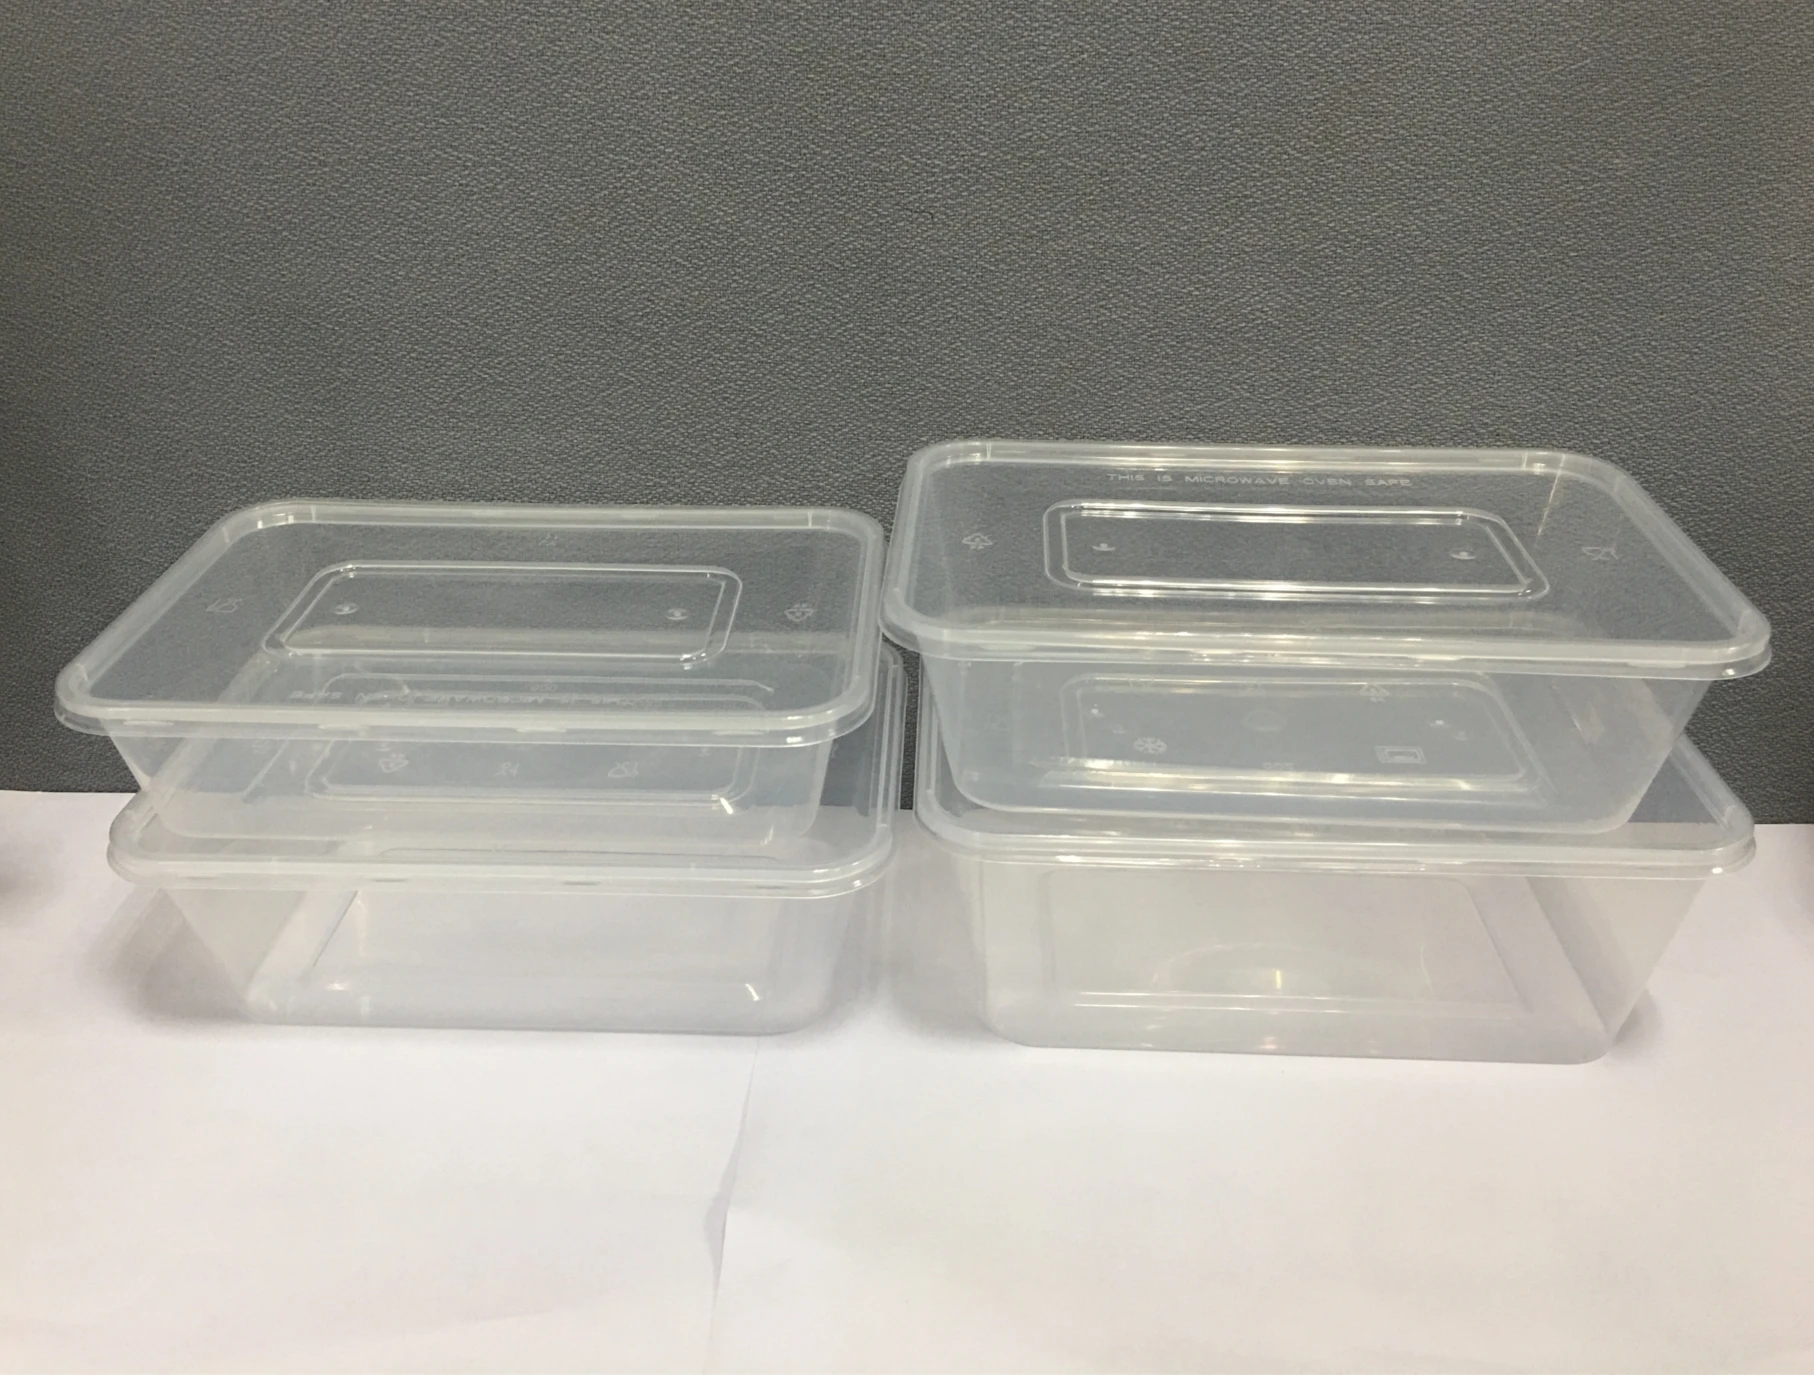 Plastic take away microwave food container